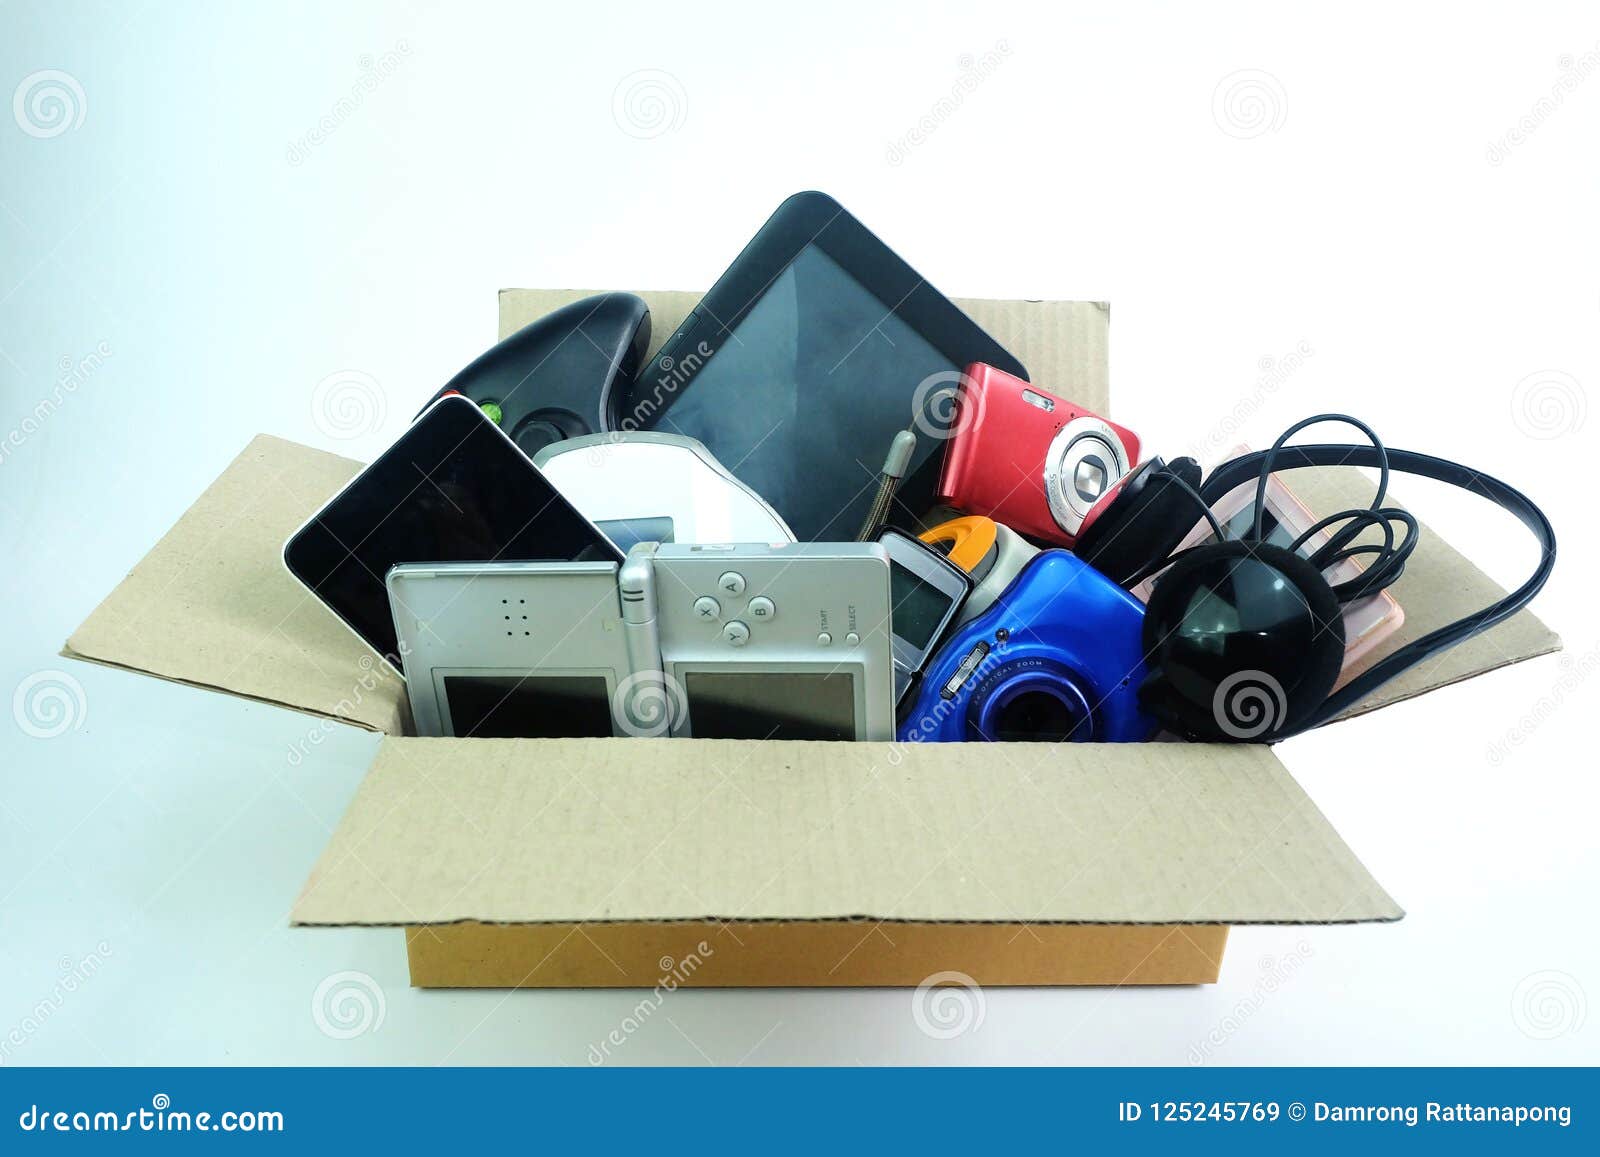 Damaged or old used electronics gadgets for daily use on white background,  Reuse and Recycle concept, Top view. Stock Photo